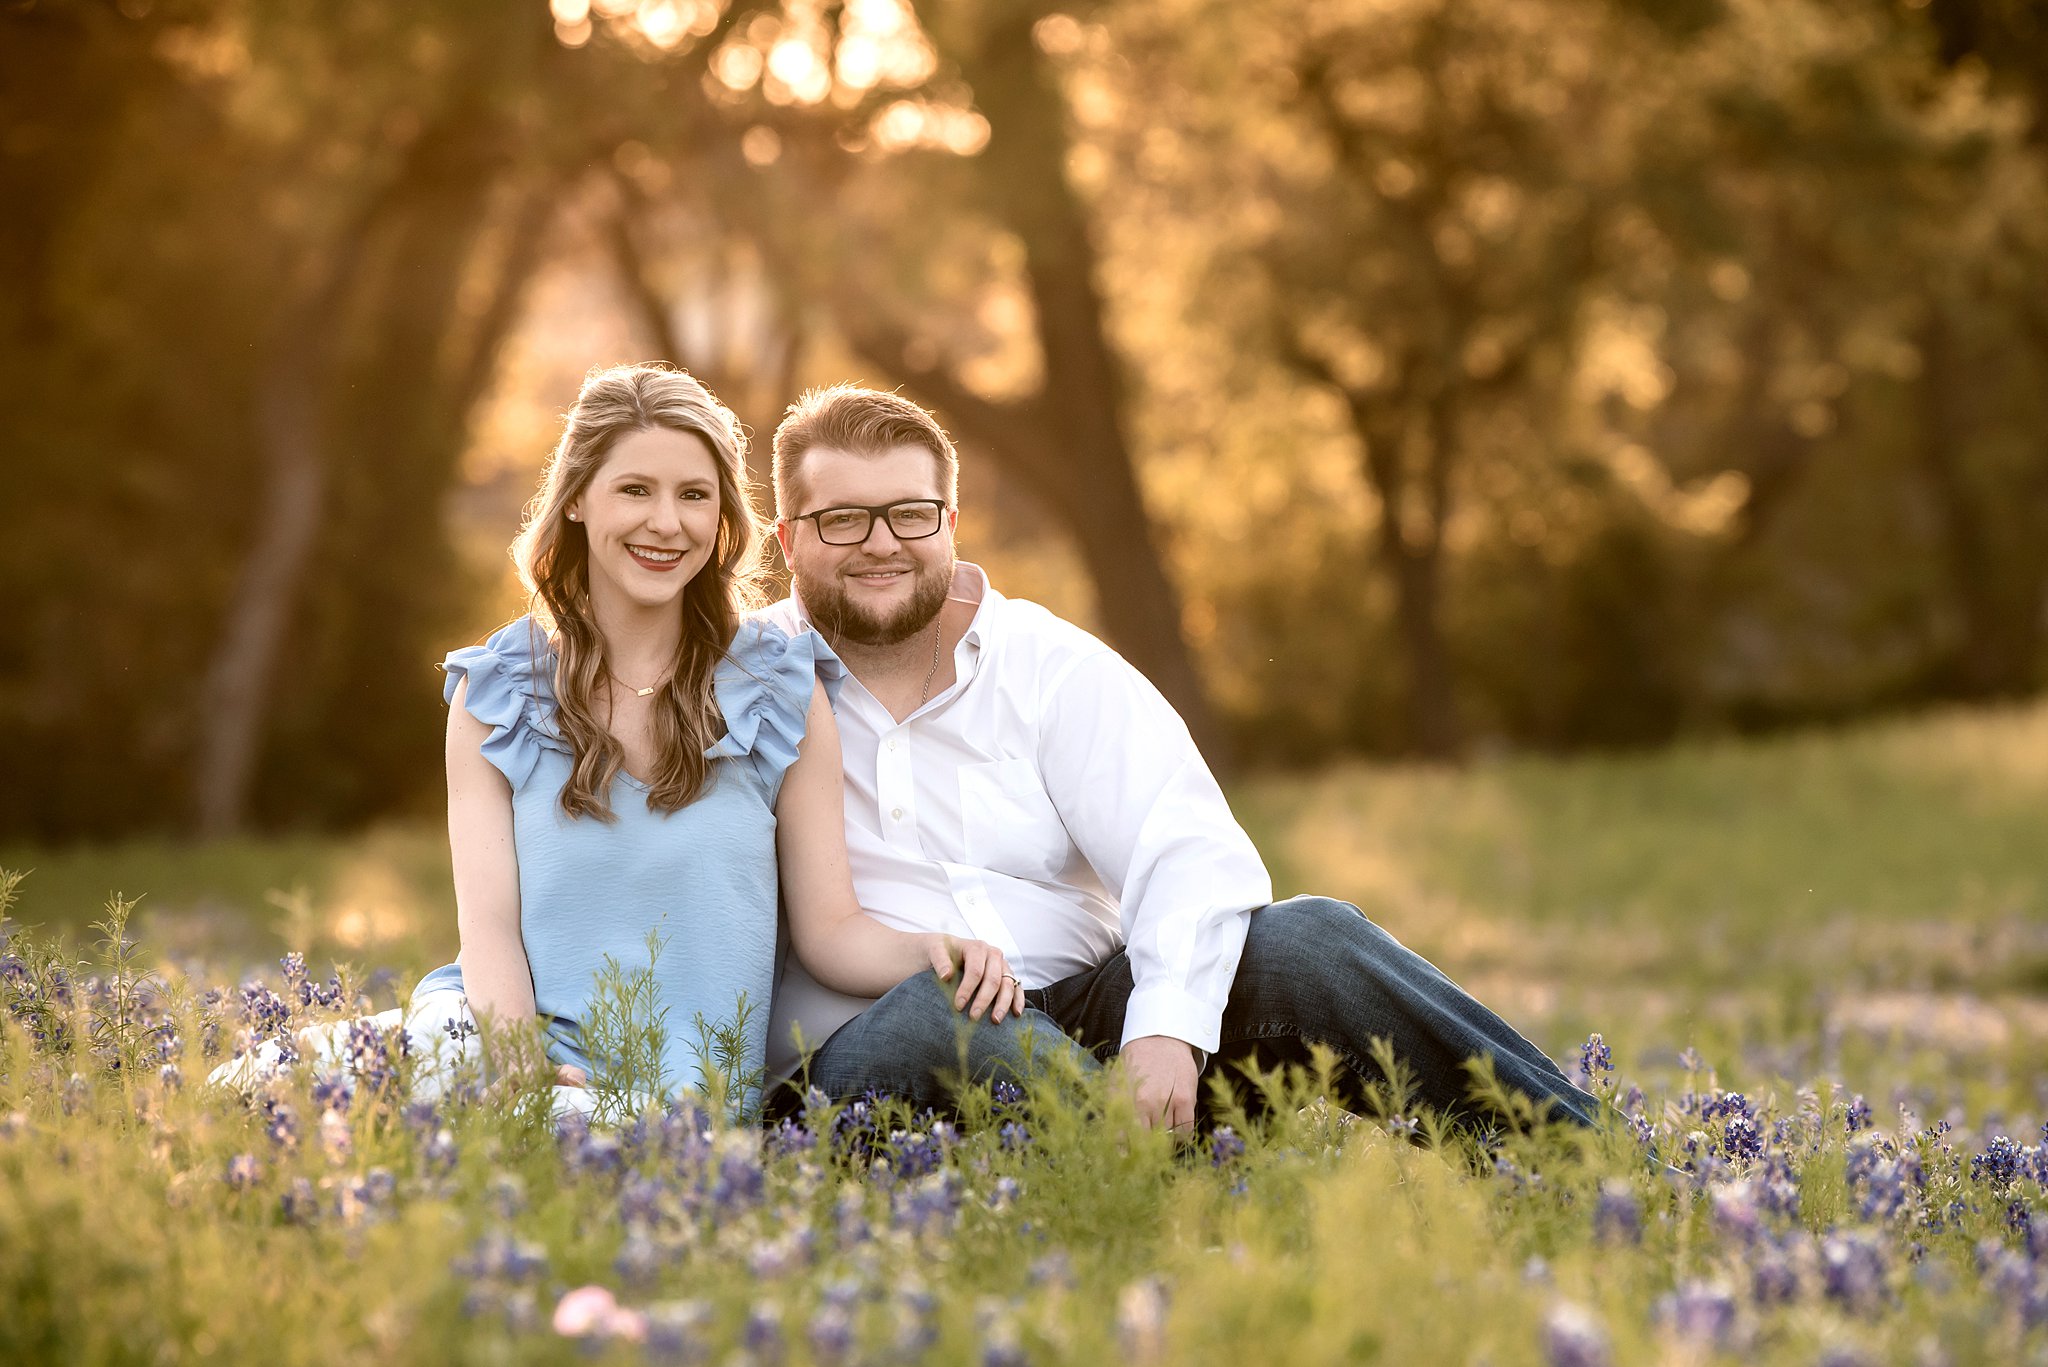 Couple wearing blue and white tops sit in field of purple flowers with sunset coming through the large trees behind them